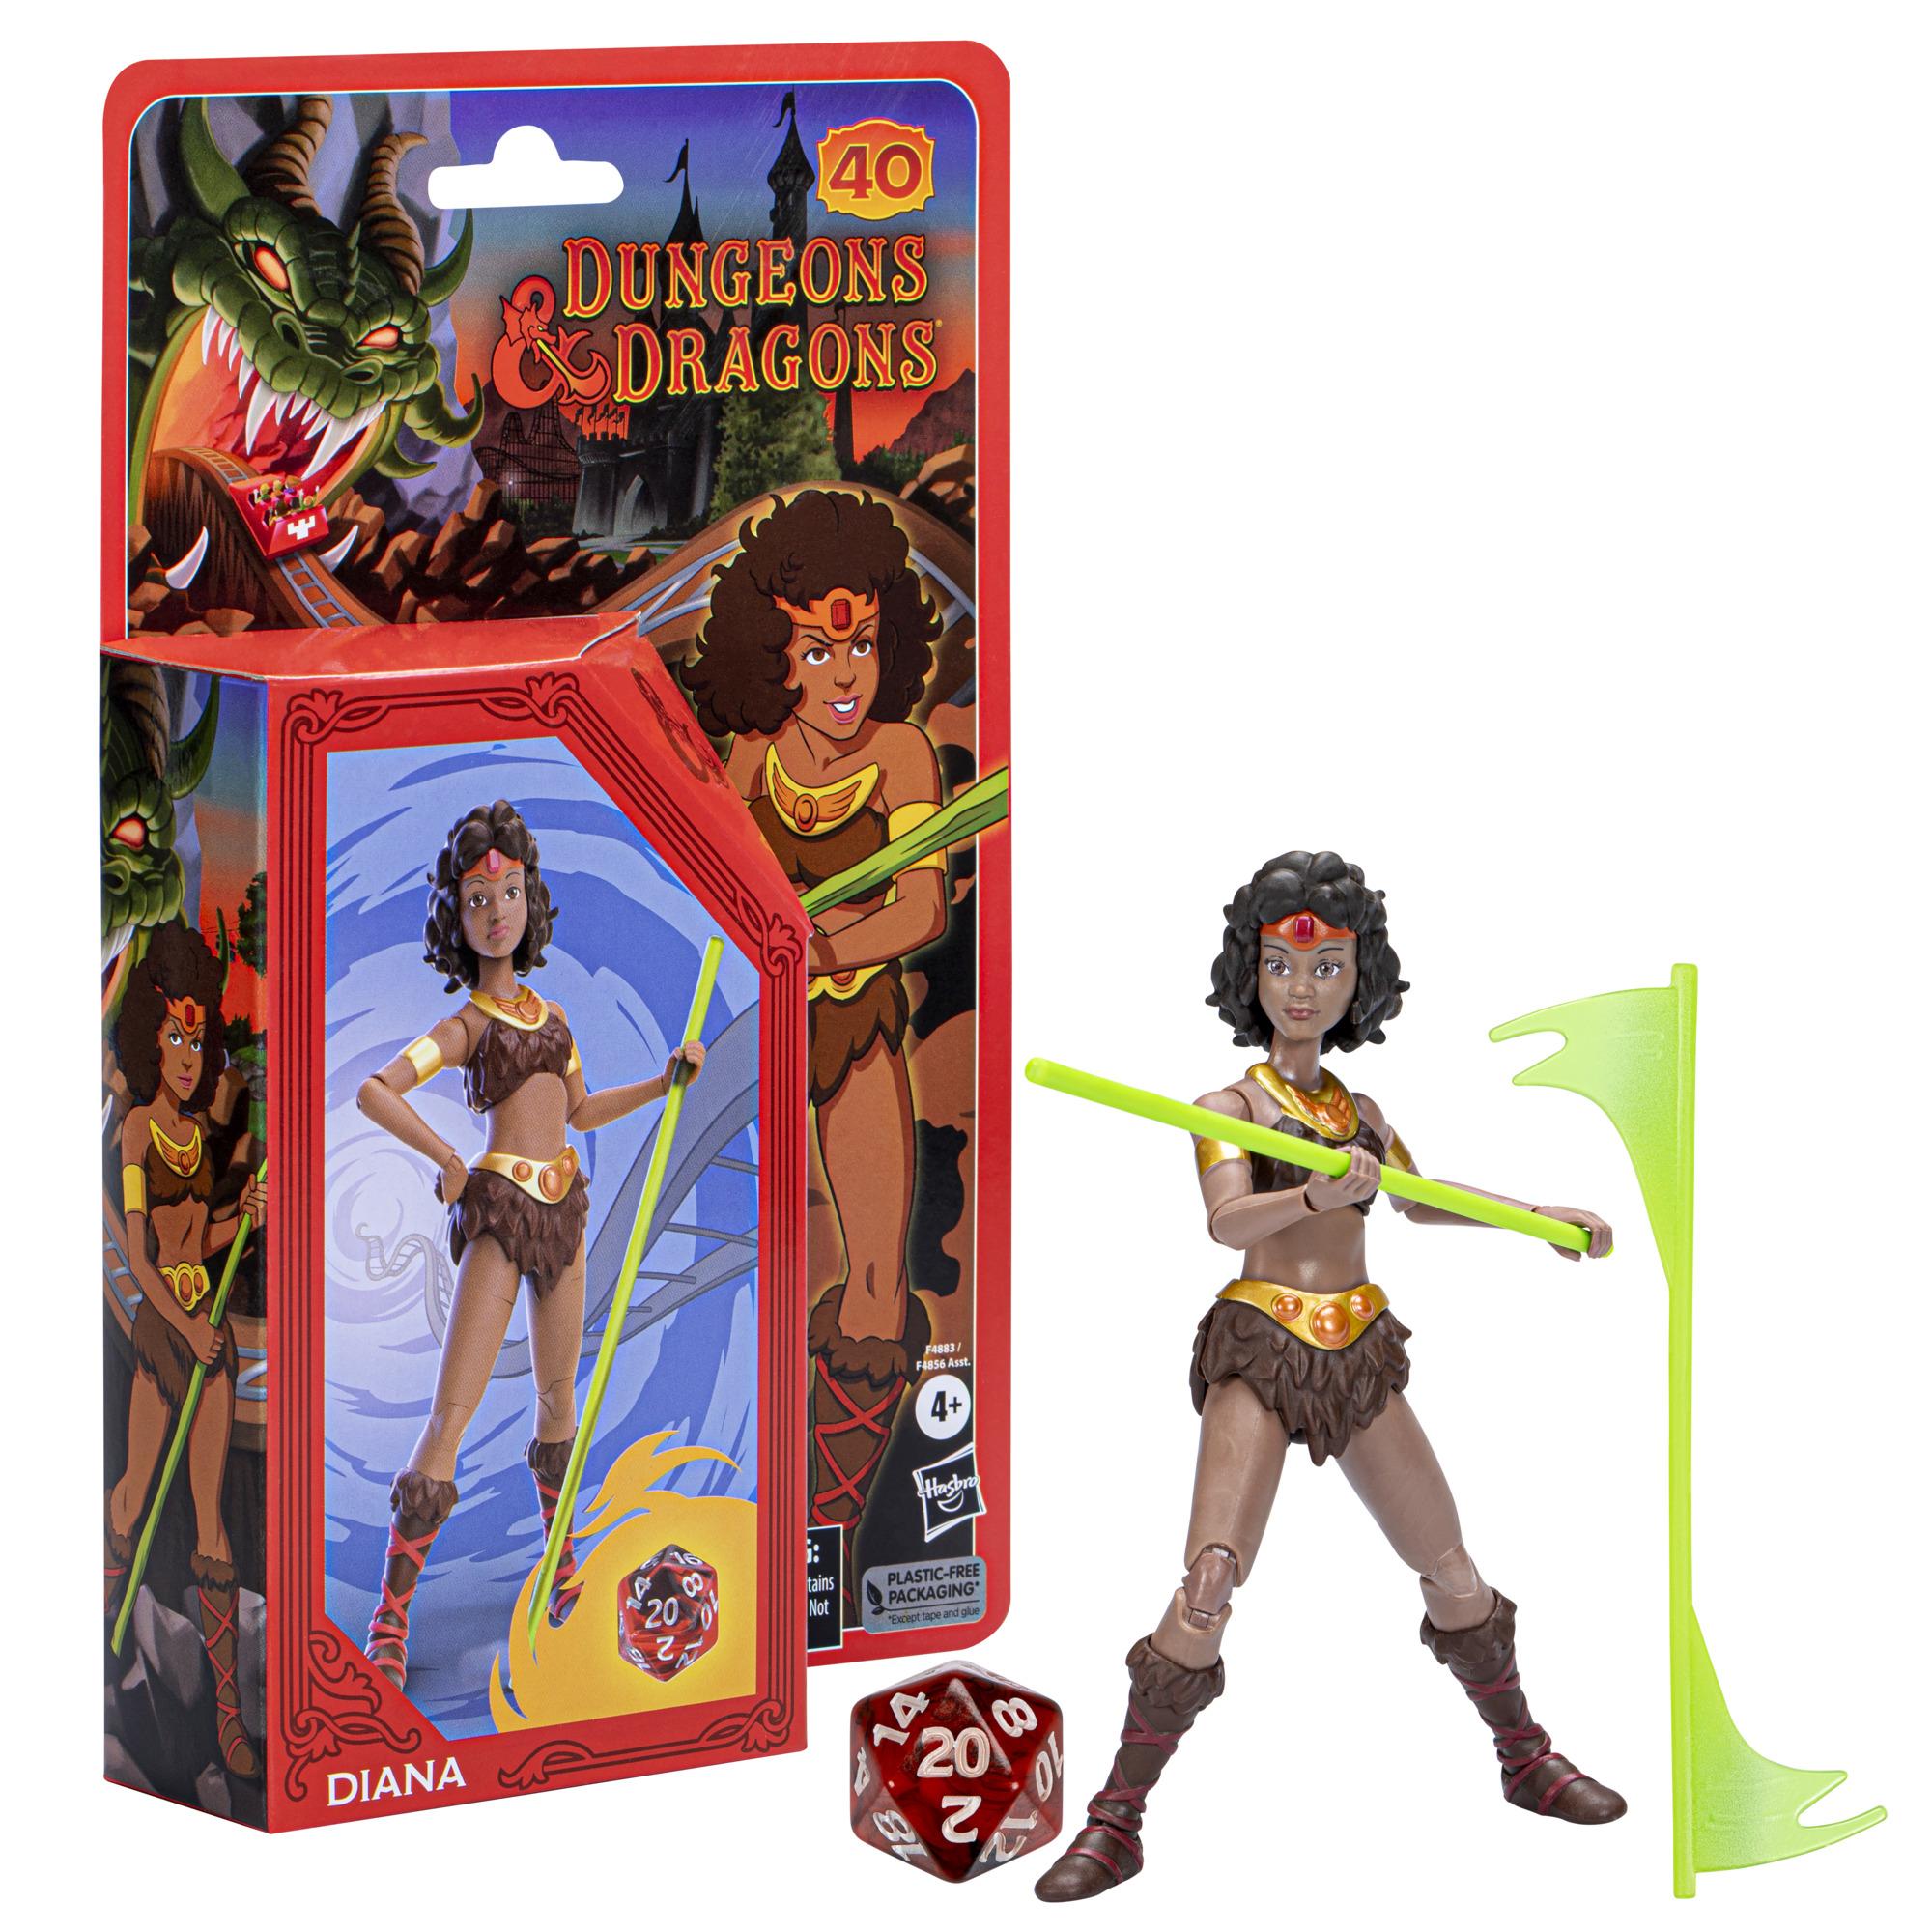 Dungeons & Dragons Cartoon Classics 6-Inch-Scale Action Figure - Diana the  Acrobat